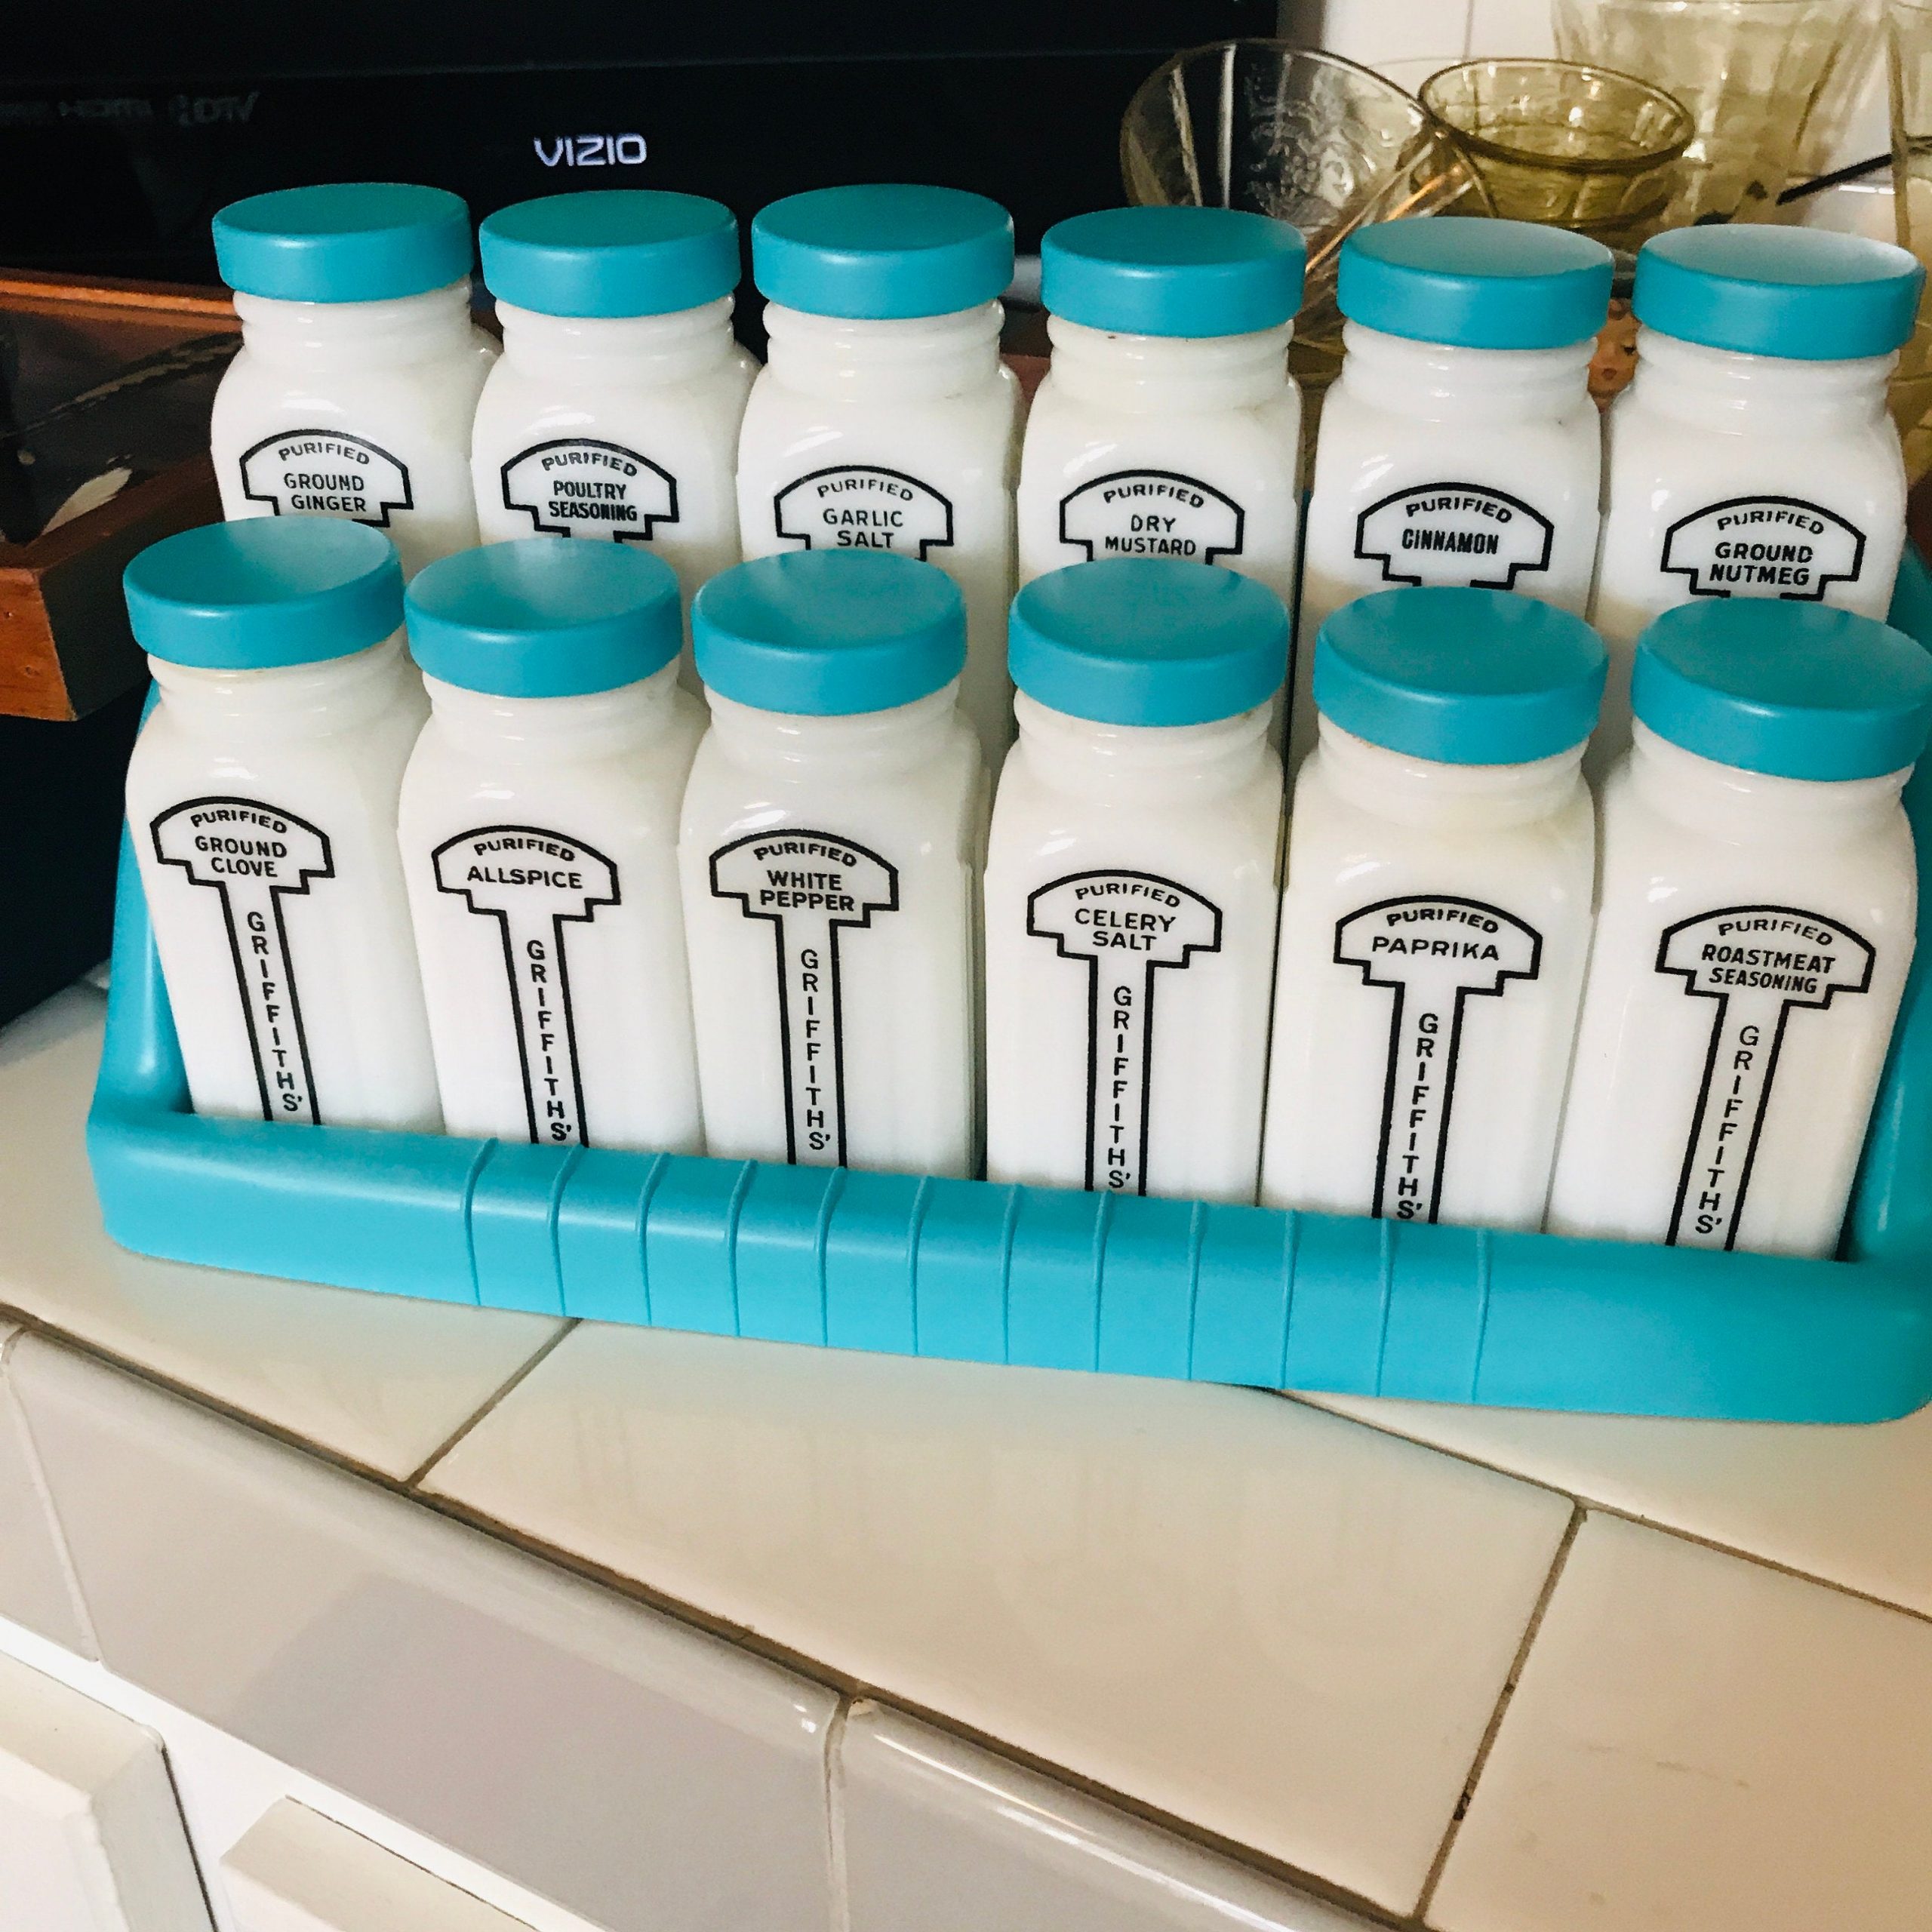 https://www.truevintageantiques.com/wp-content/uploads/2020/06/vintage-1950s-milk-glass-spice-jars-spices-rack-with-12-large-griffiiths-aqua-blue-lids-rack-farmhouse-collectible-display-retro-kitchen-5ee0067b8-scaled.jpg